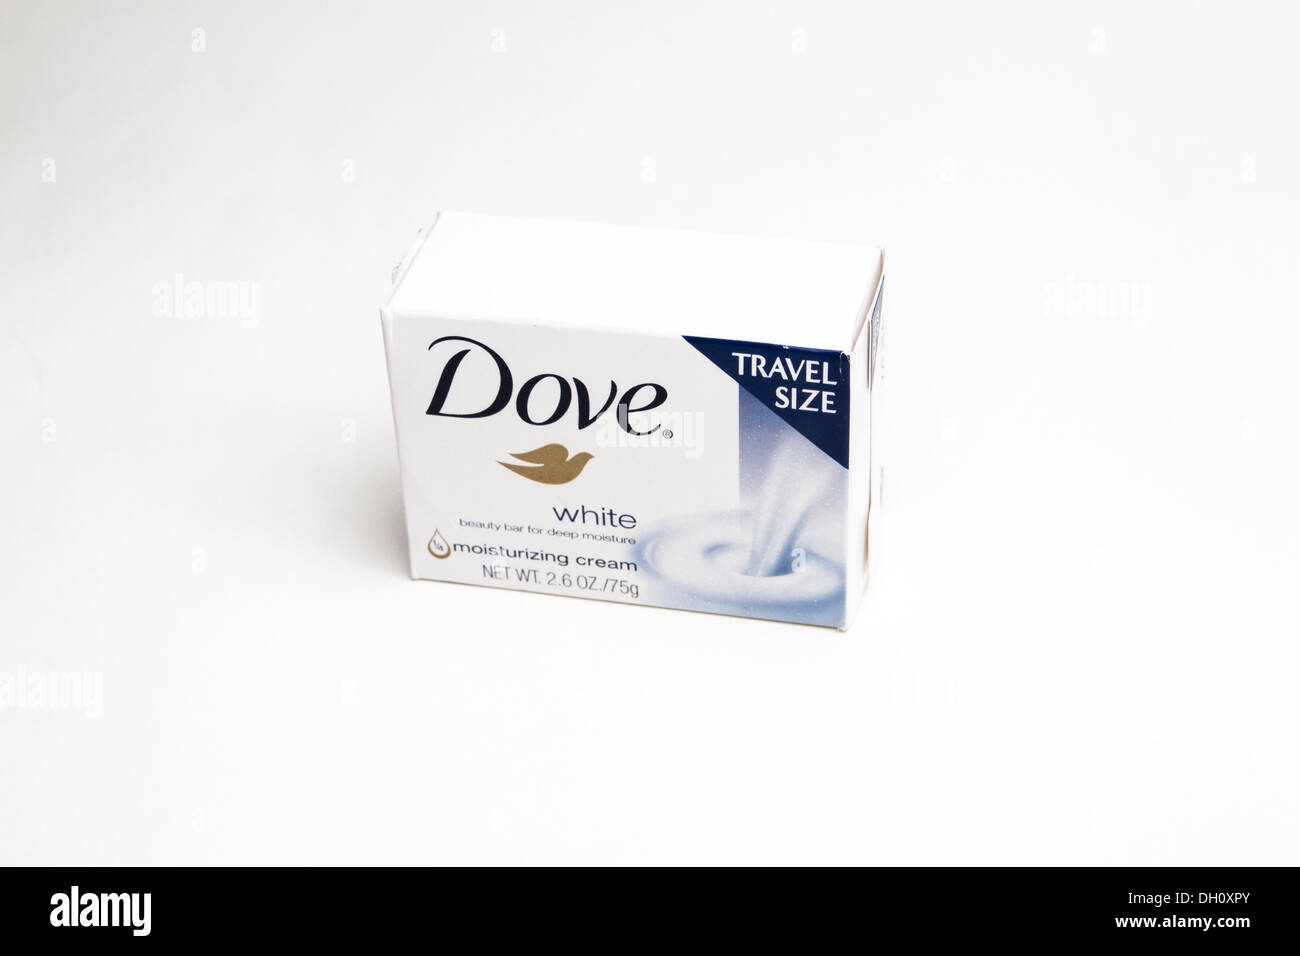 Dove soap in a travel size Stock Photo - Alamy